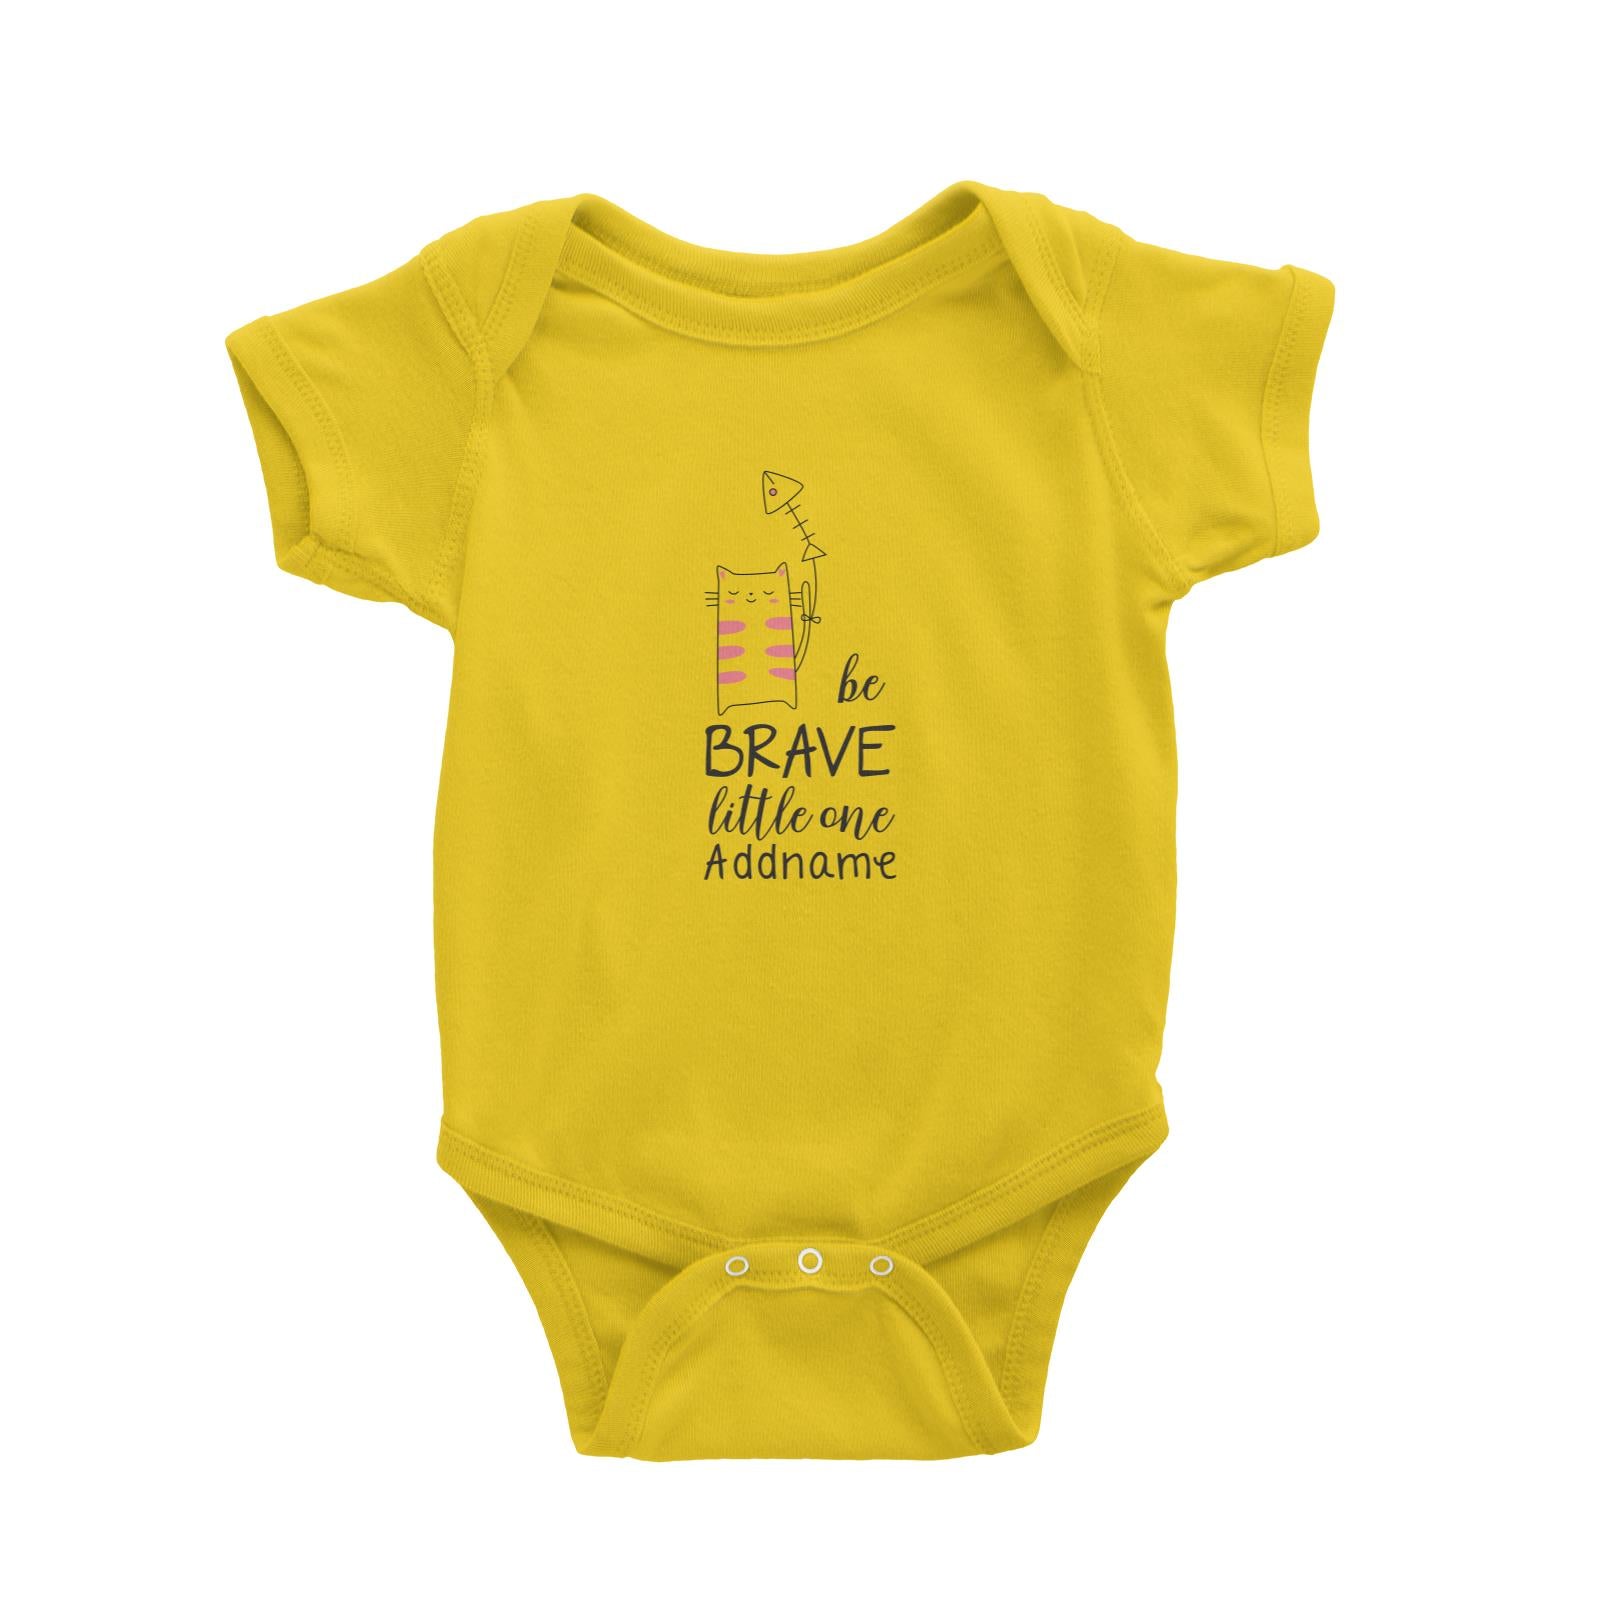 Cute Animals and Friends Series 2 Cat Be Brave Little One Addname Baby Romper